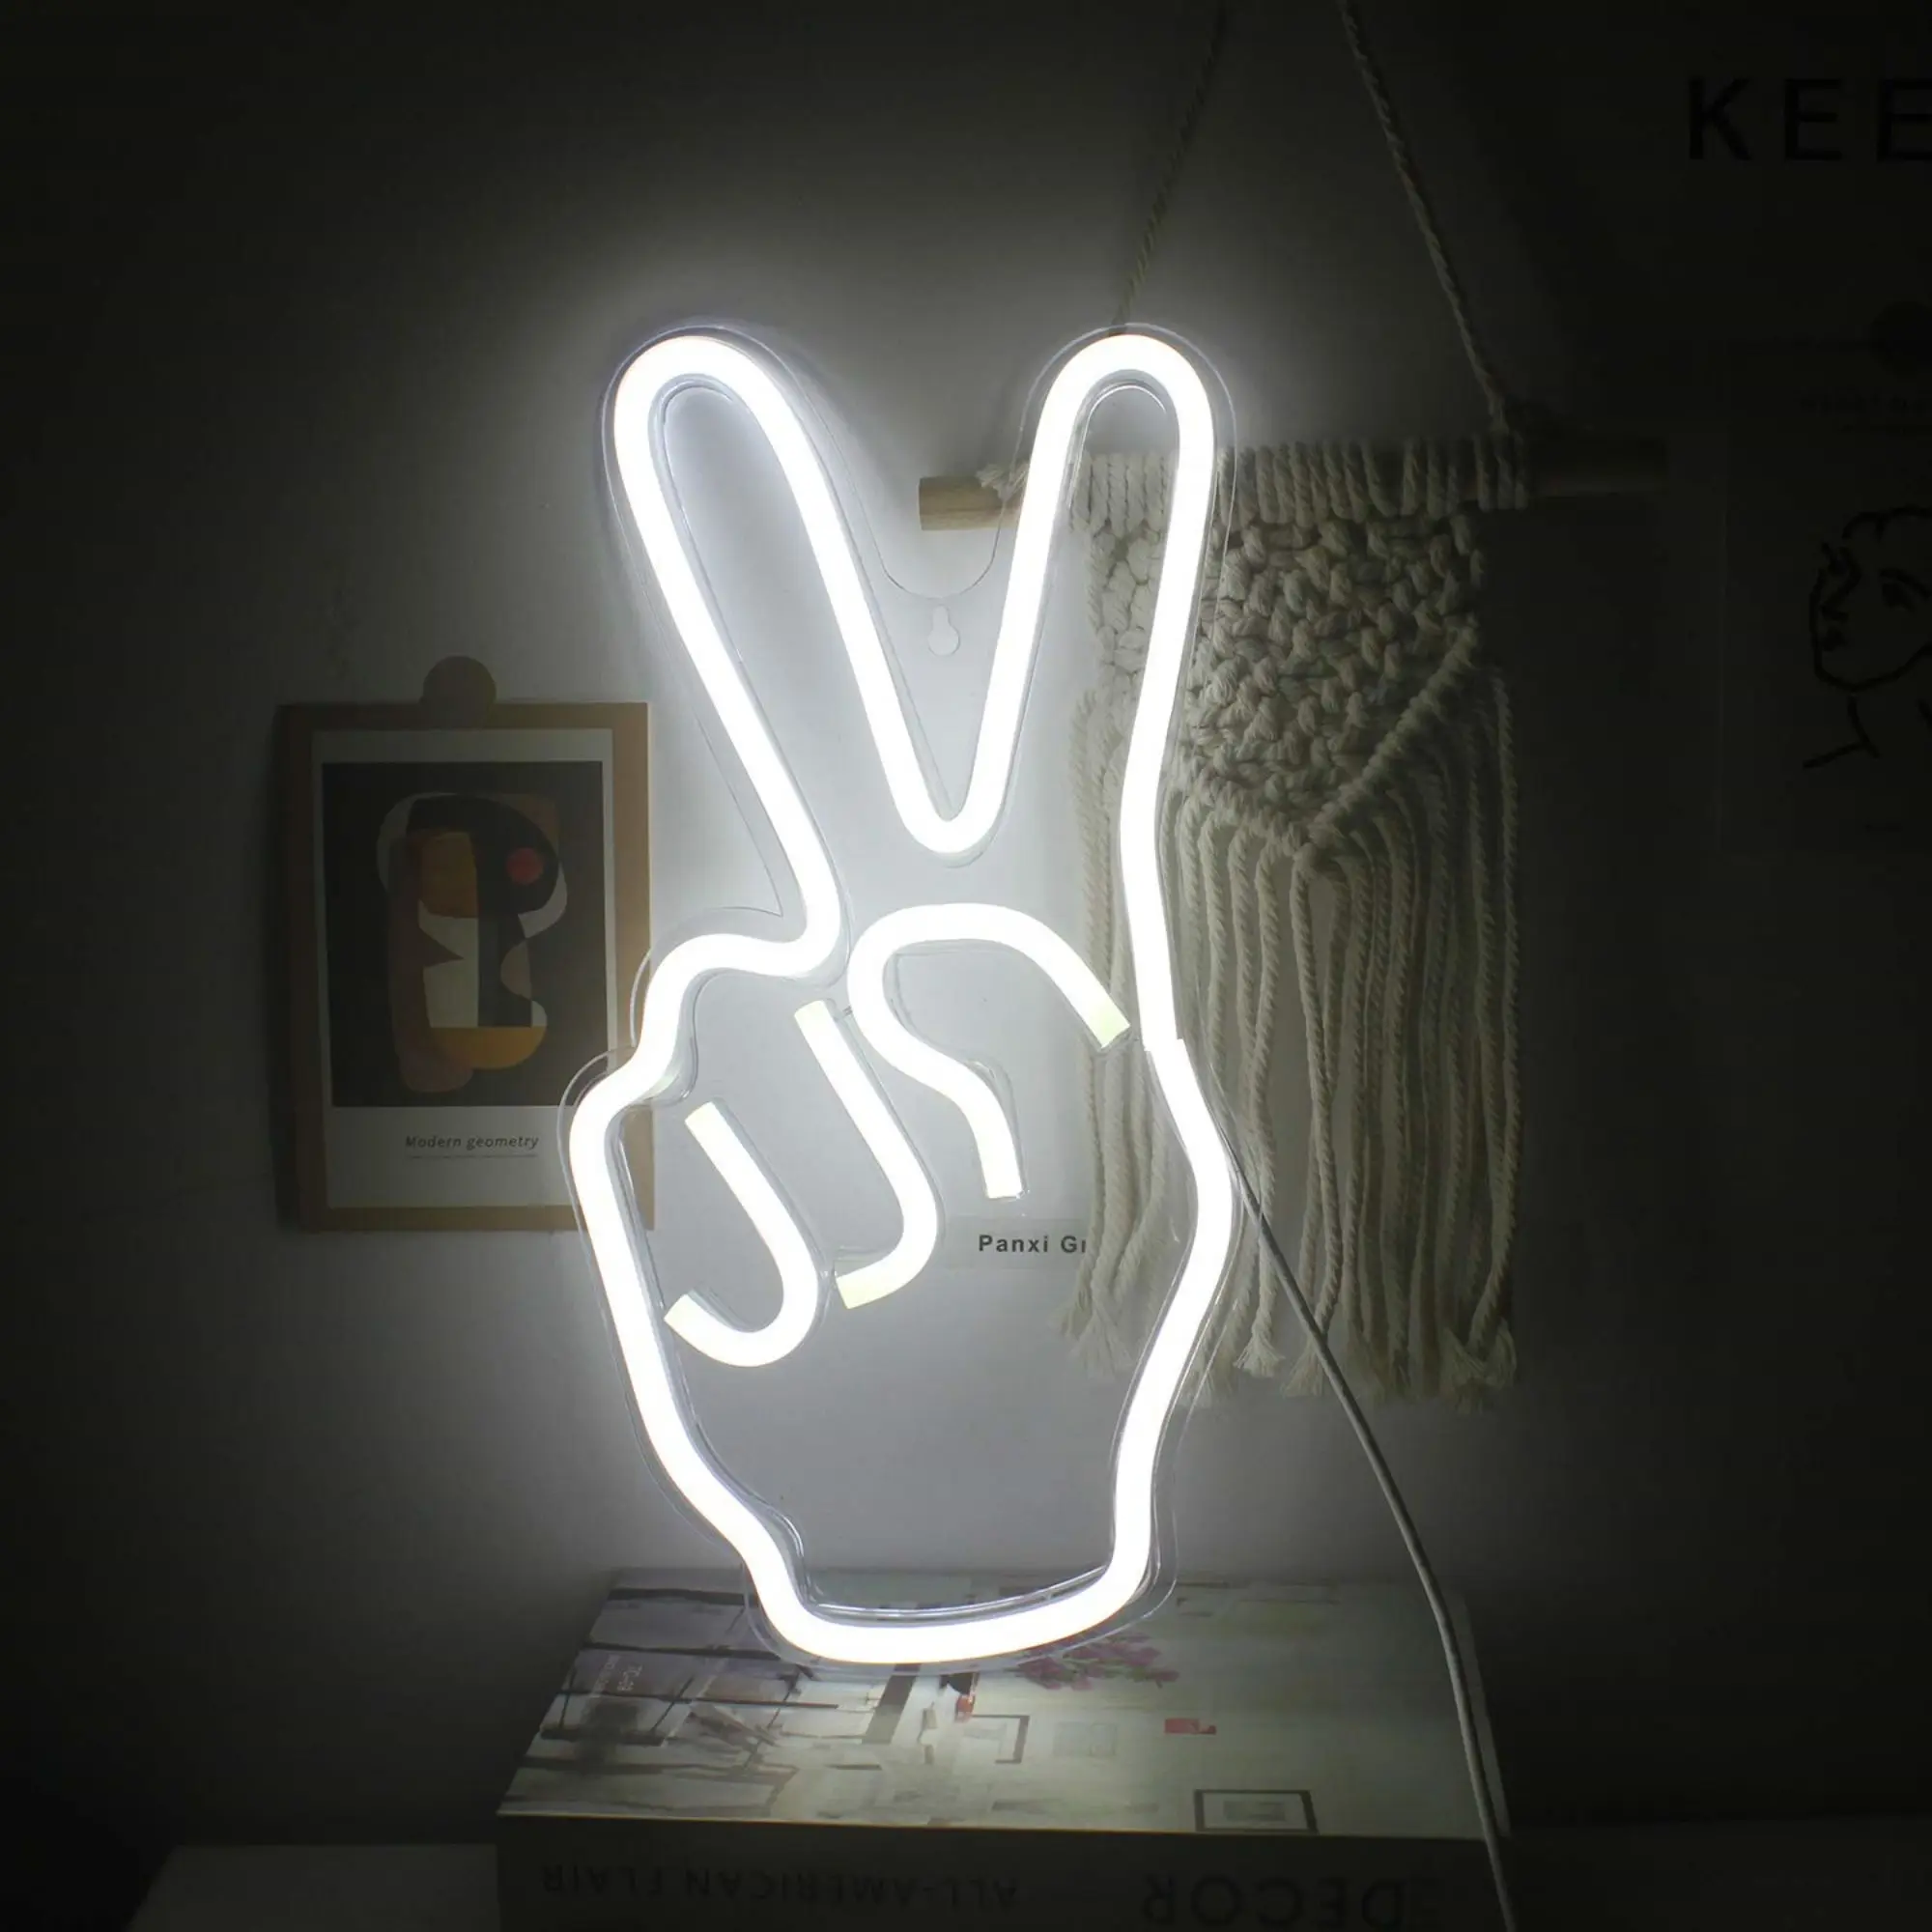 

Victory Gesture Neon Signs Peace Finger Sign Wall Decor Neon Light Novelty Neon Wall Lights for Kids Home Party Holiday Decor